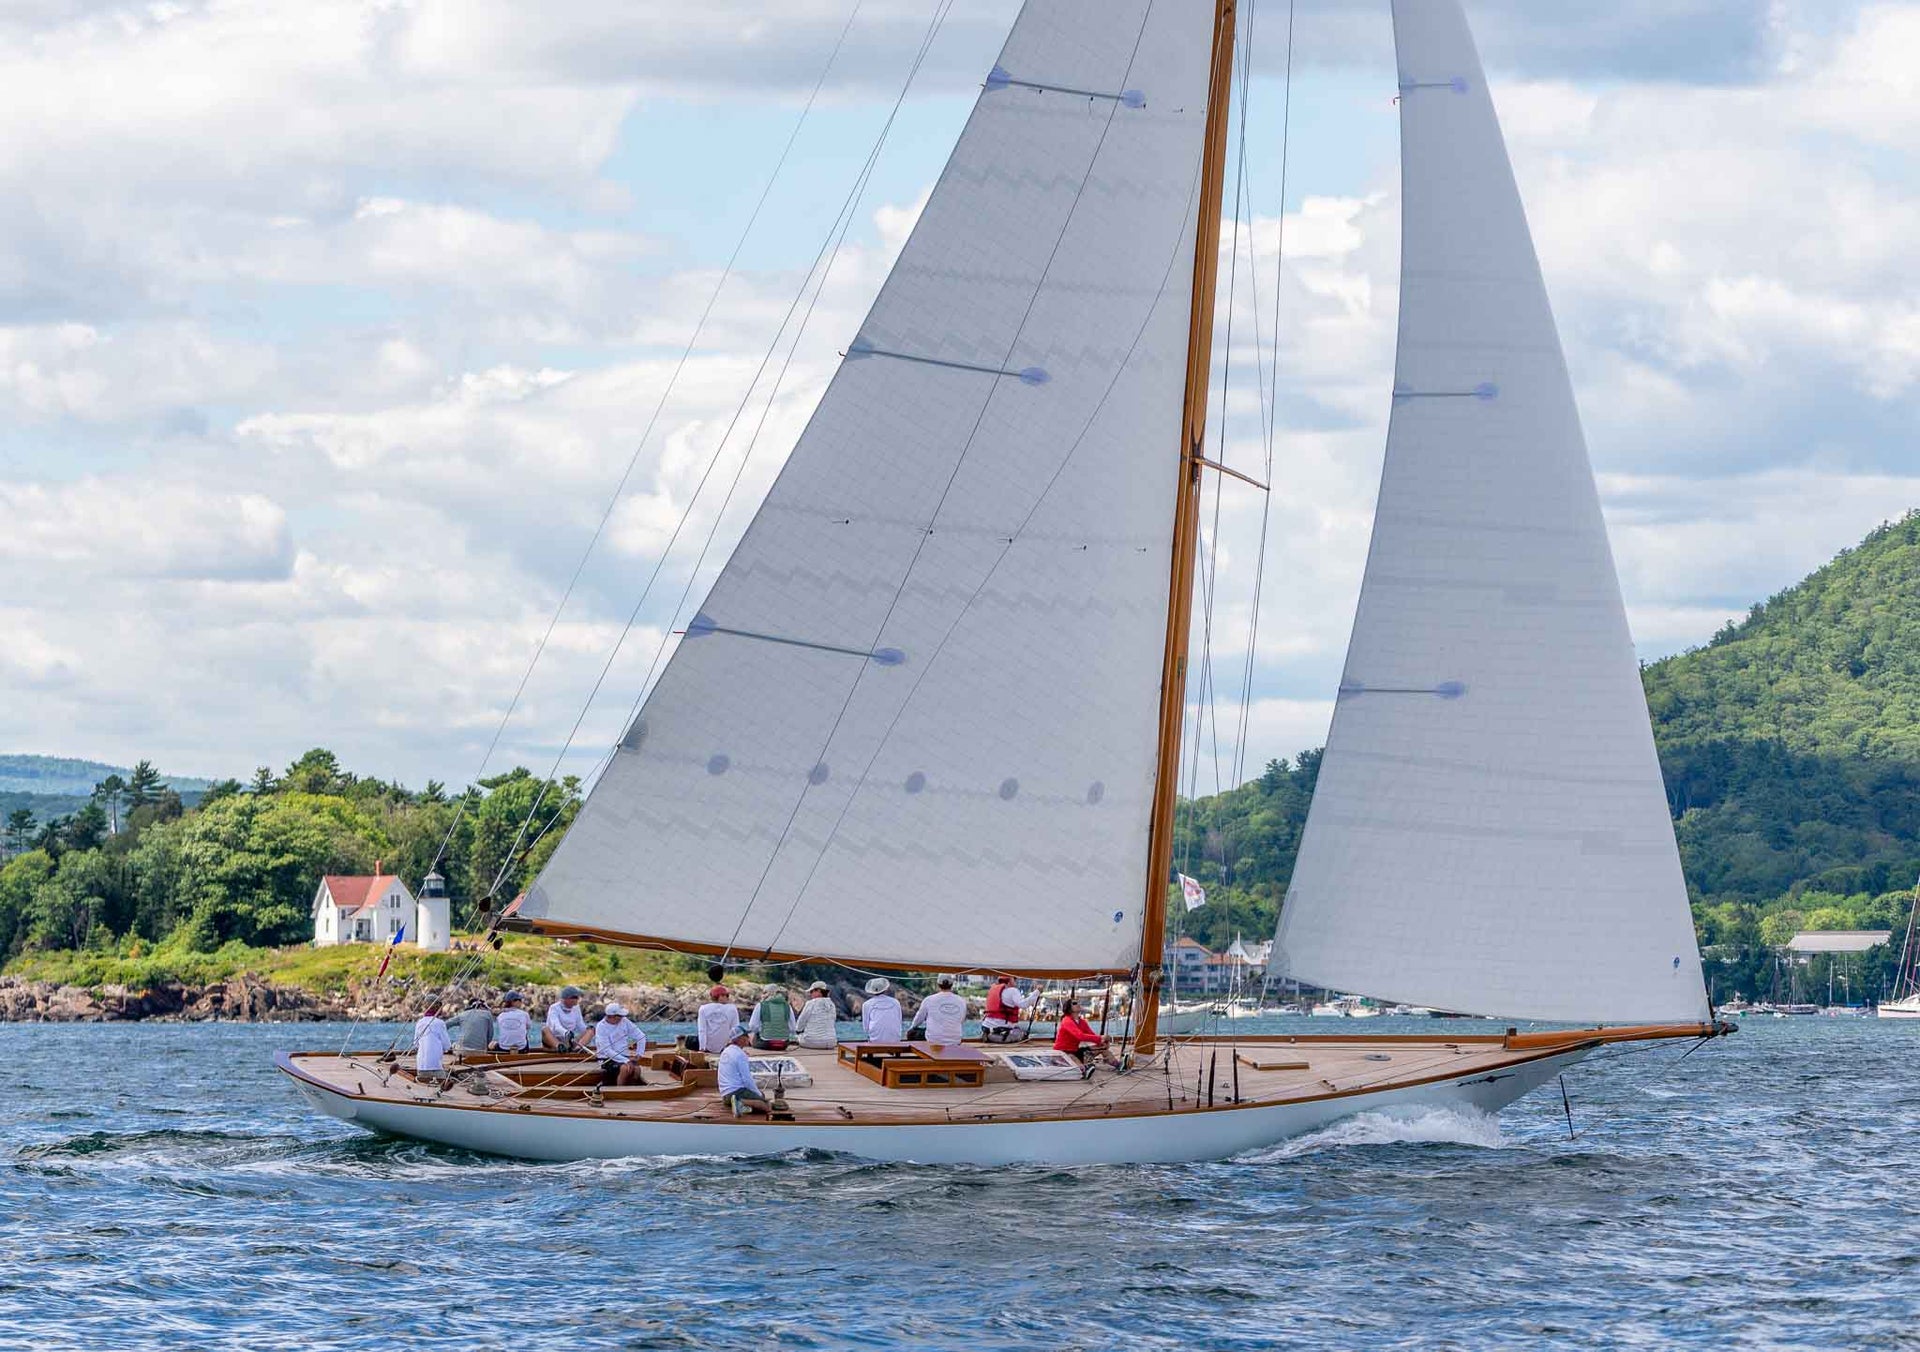 A Classic Yachting Weekend